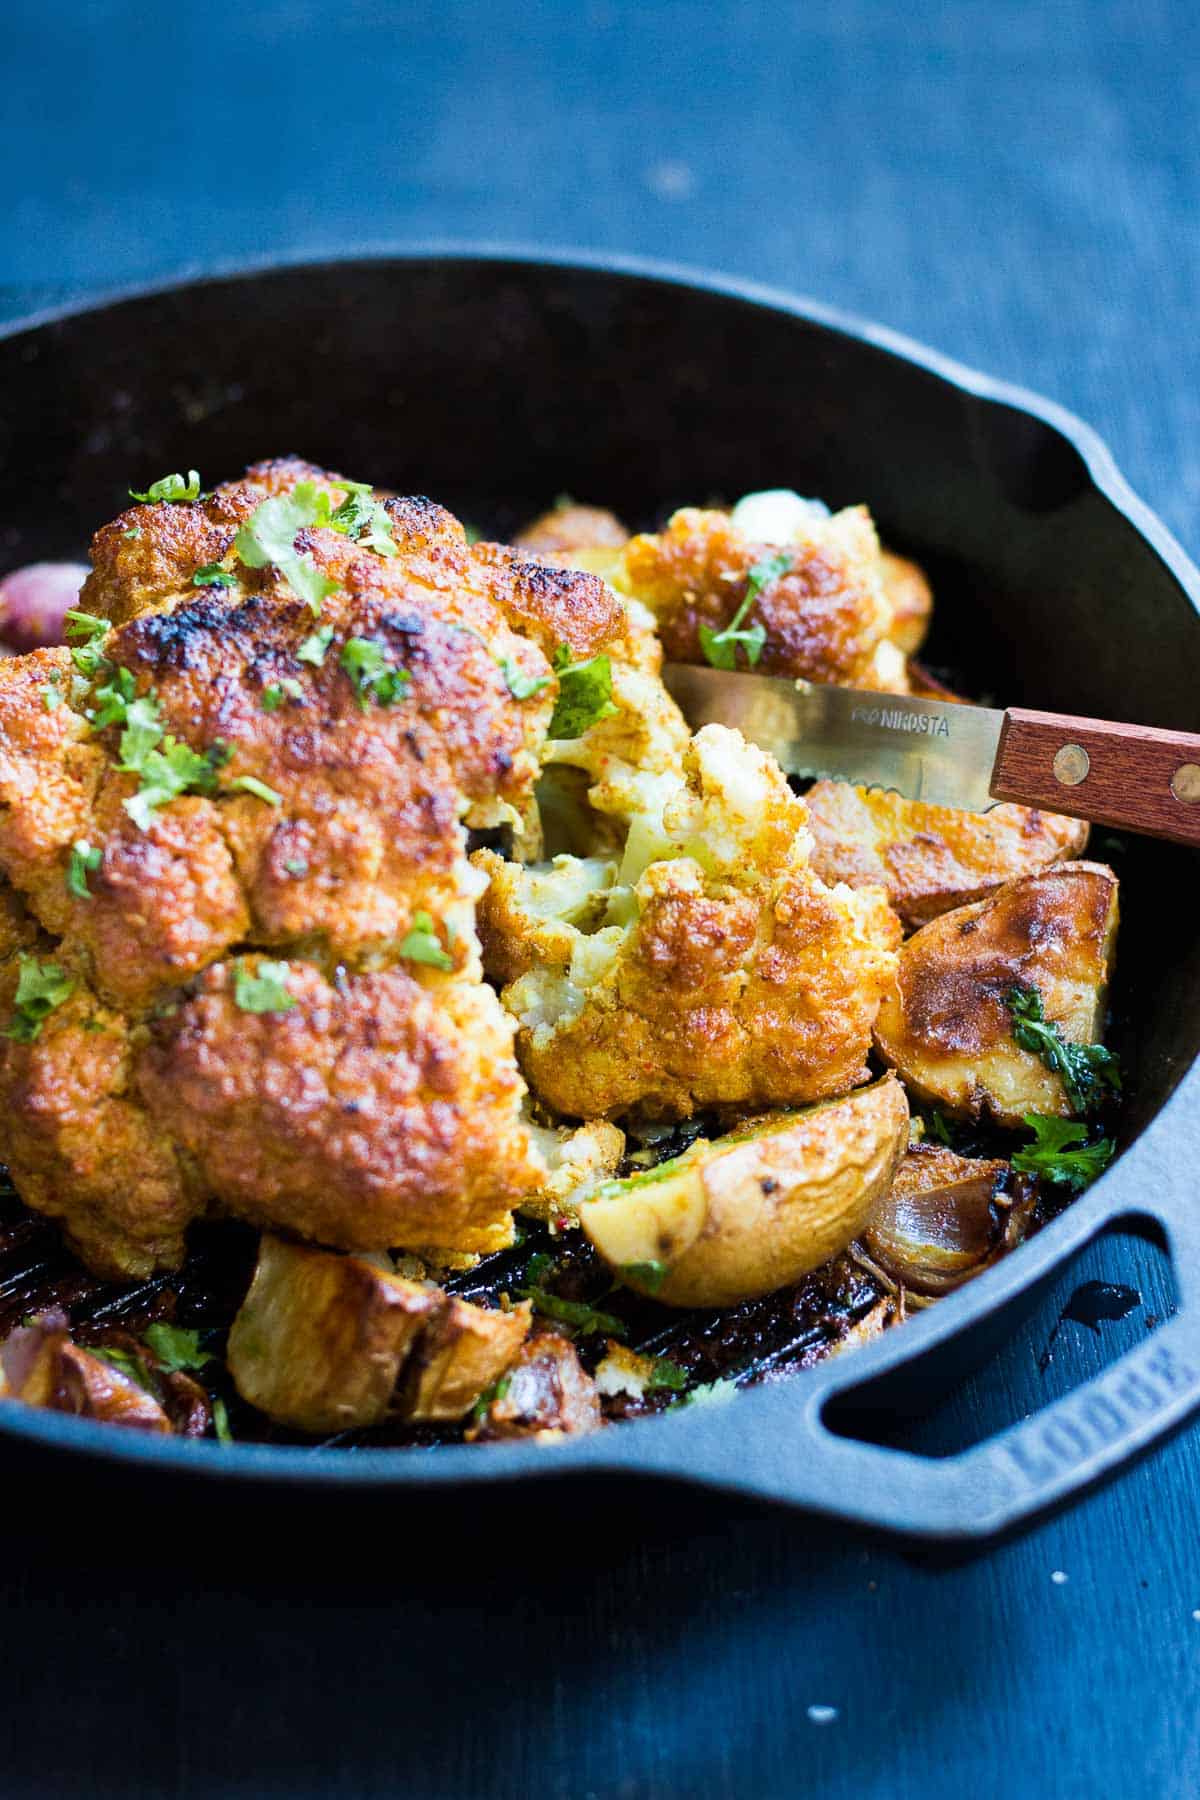 The tandoori cauliflower served with onions and potatoes in a skillet.